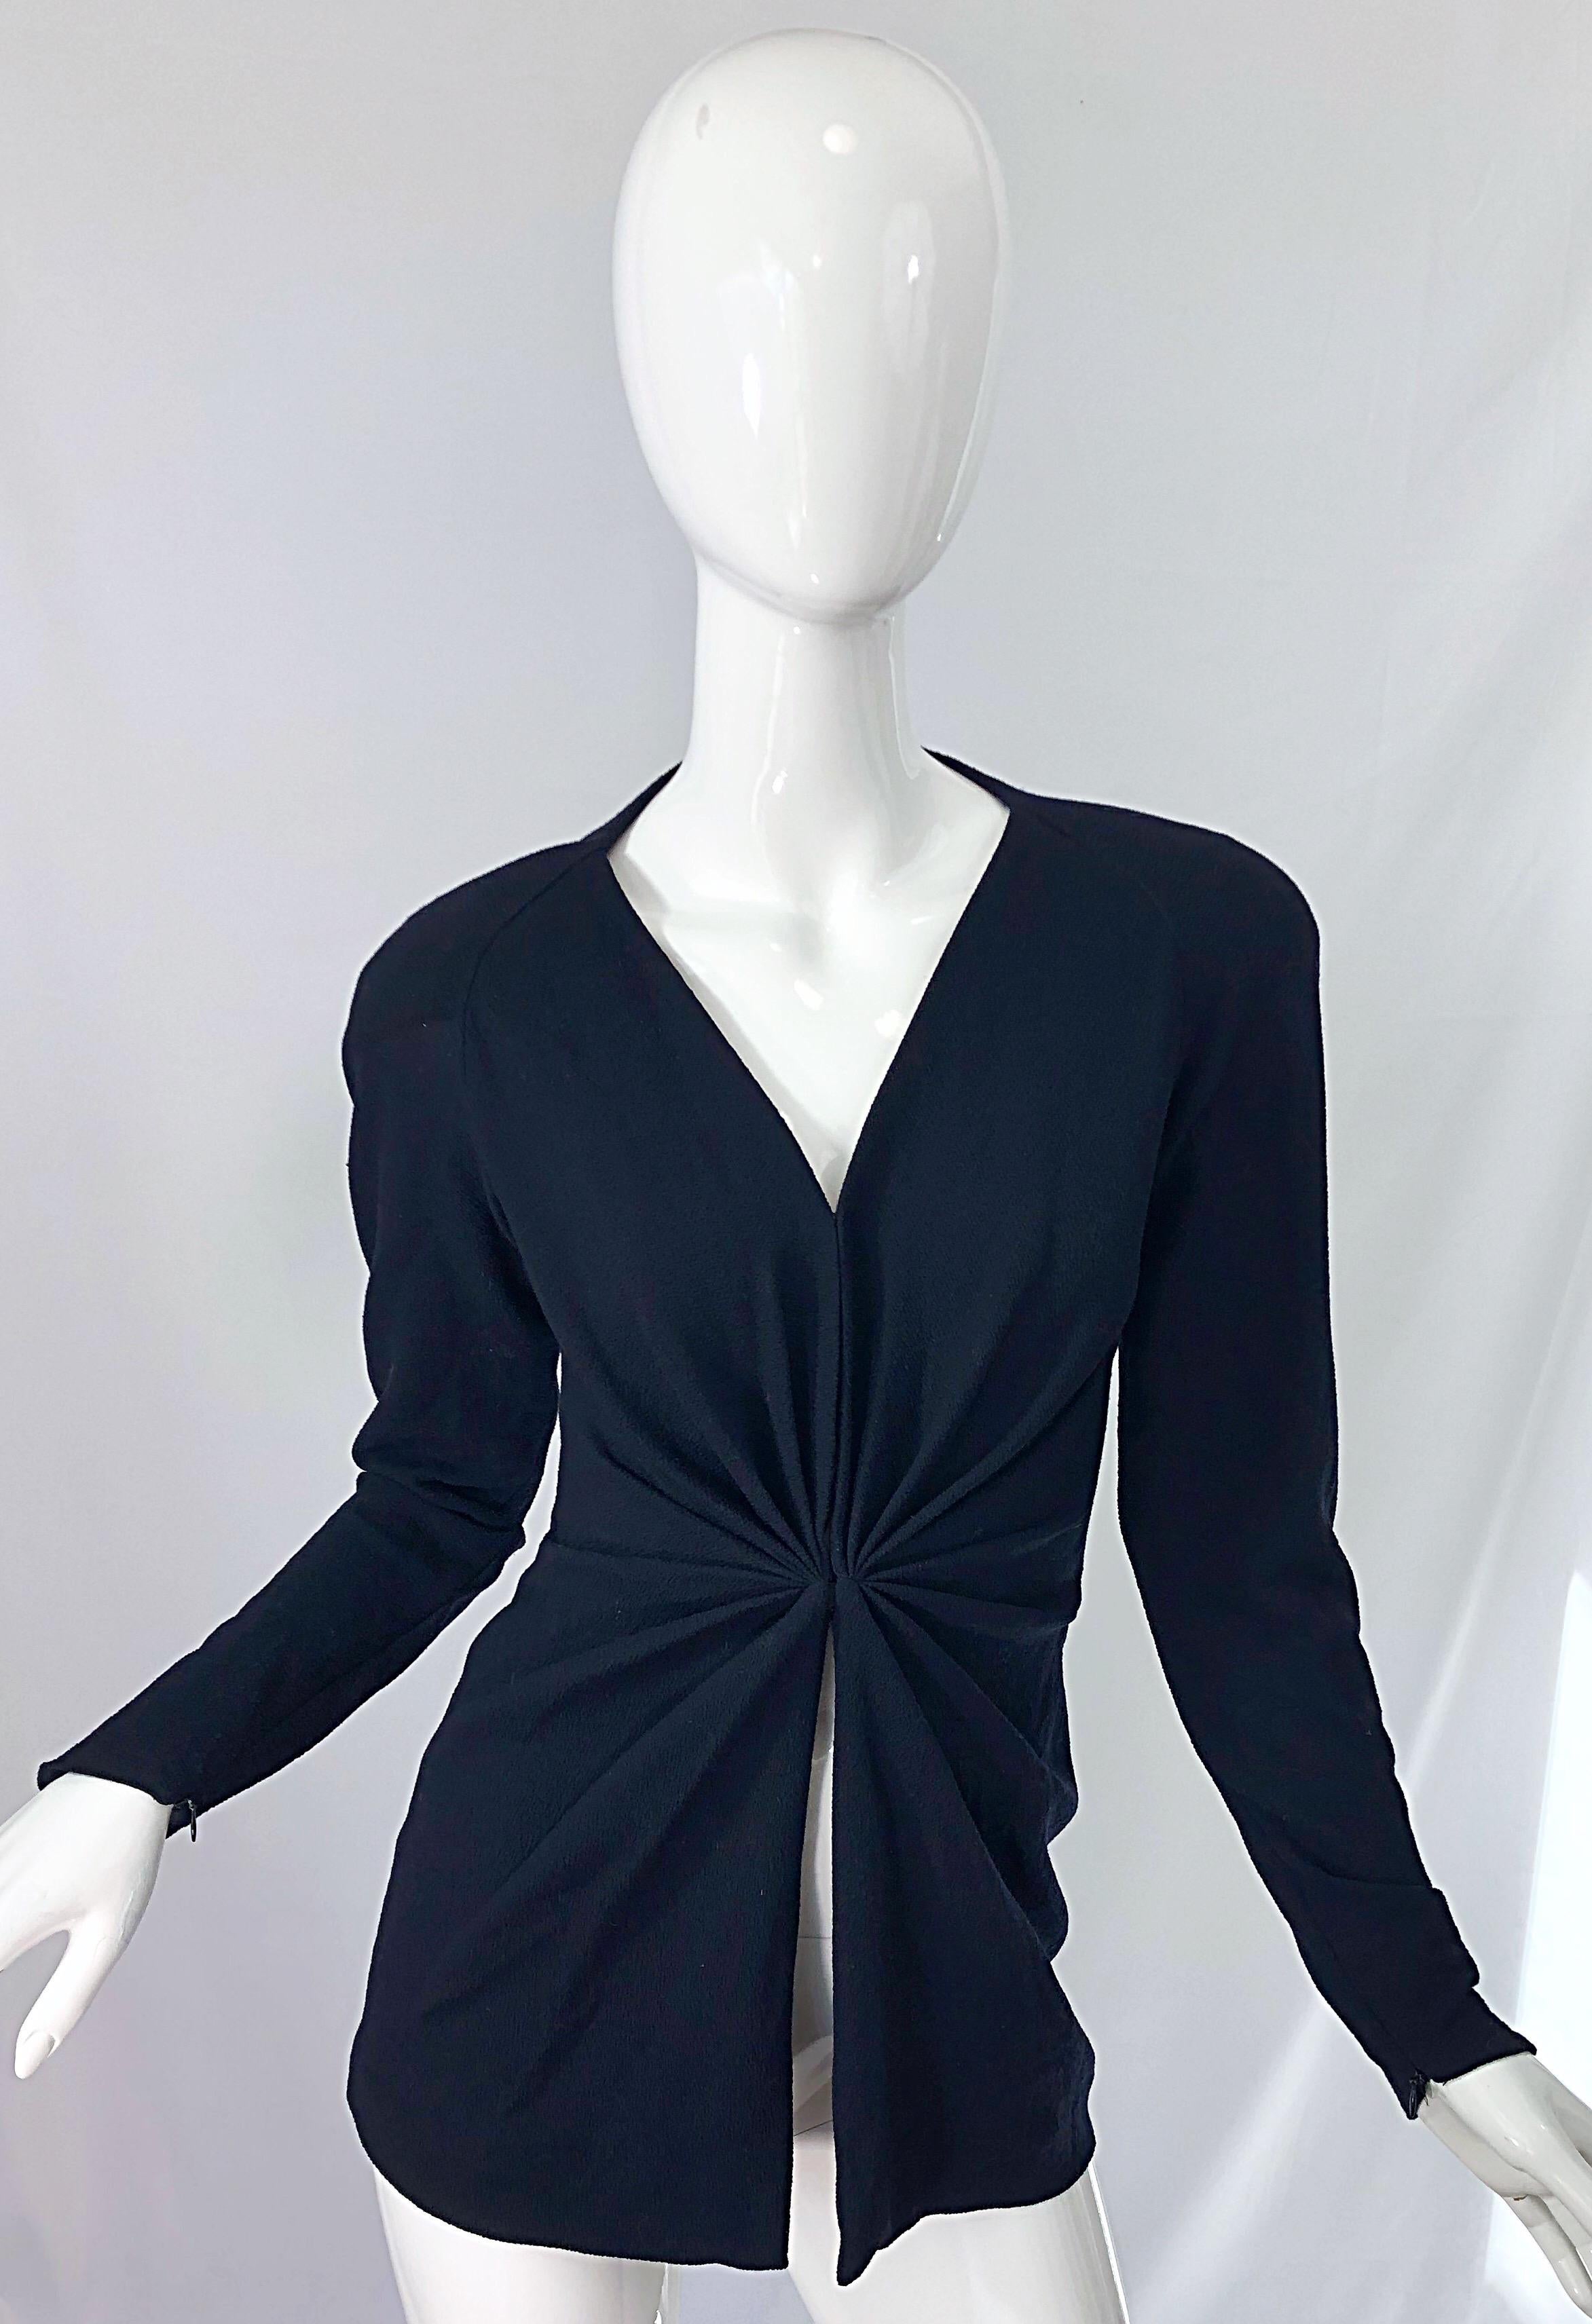 Vintage Donna Karan Collection 1990s Does 1940s Black Rayon Crepe 90s Blouse Top 6